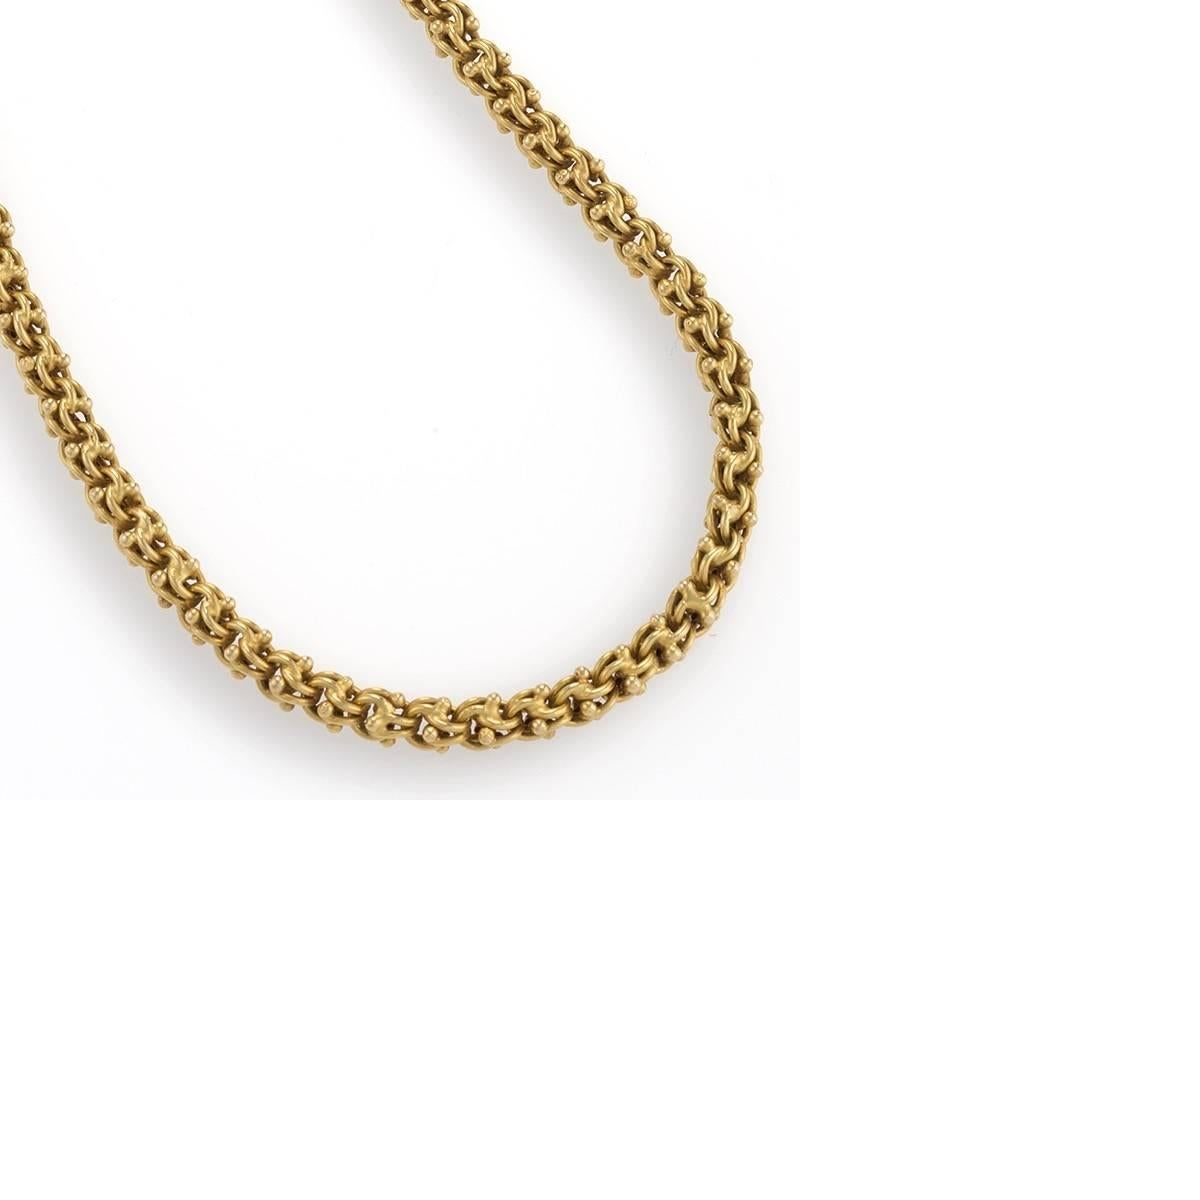 This antique gold long chain necklace is composed of tightly interlocking pairs of rounded links edged by small spheres. Generously long and versatile, it can suspend a pendant, or be doubled or tripled to nest on its own or layered with